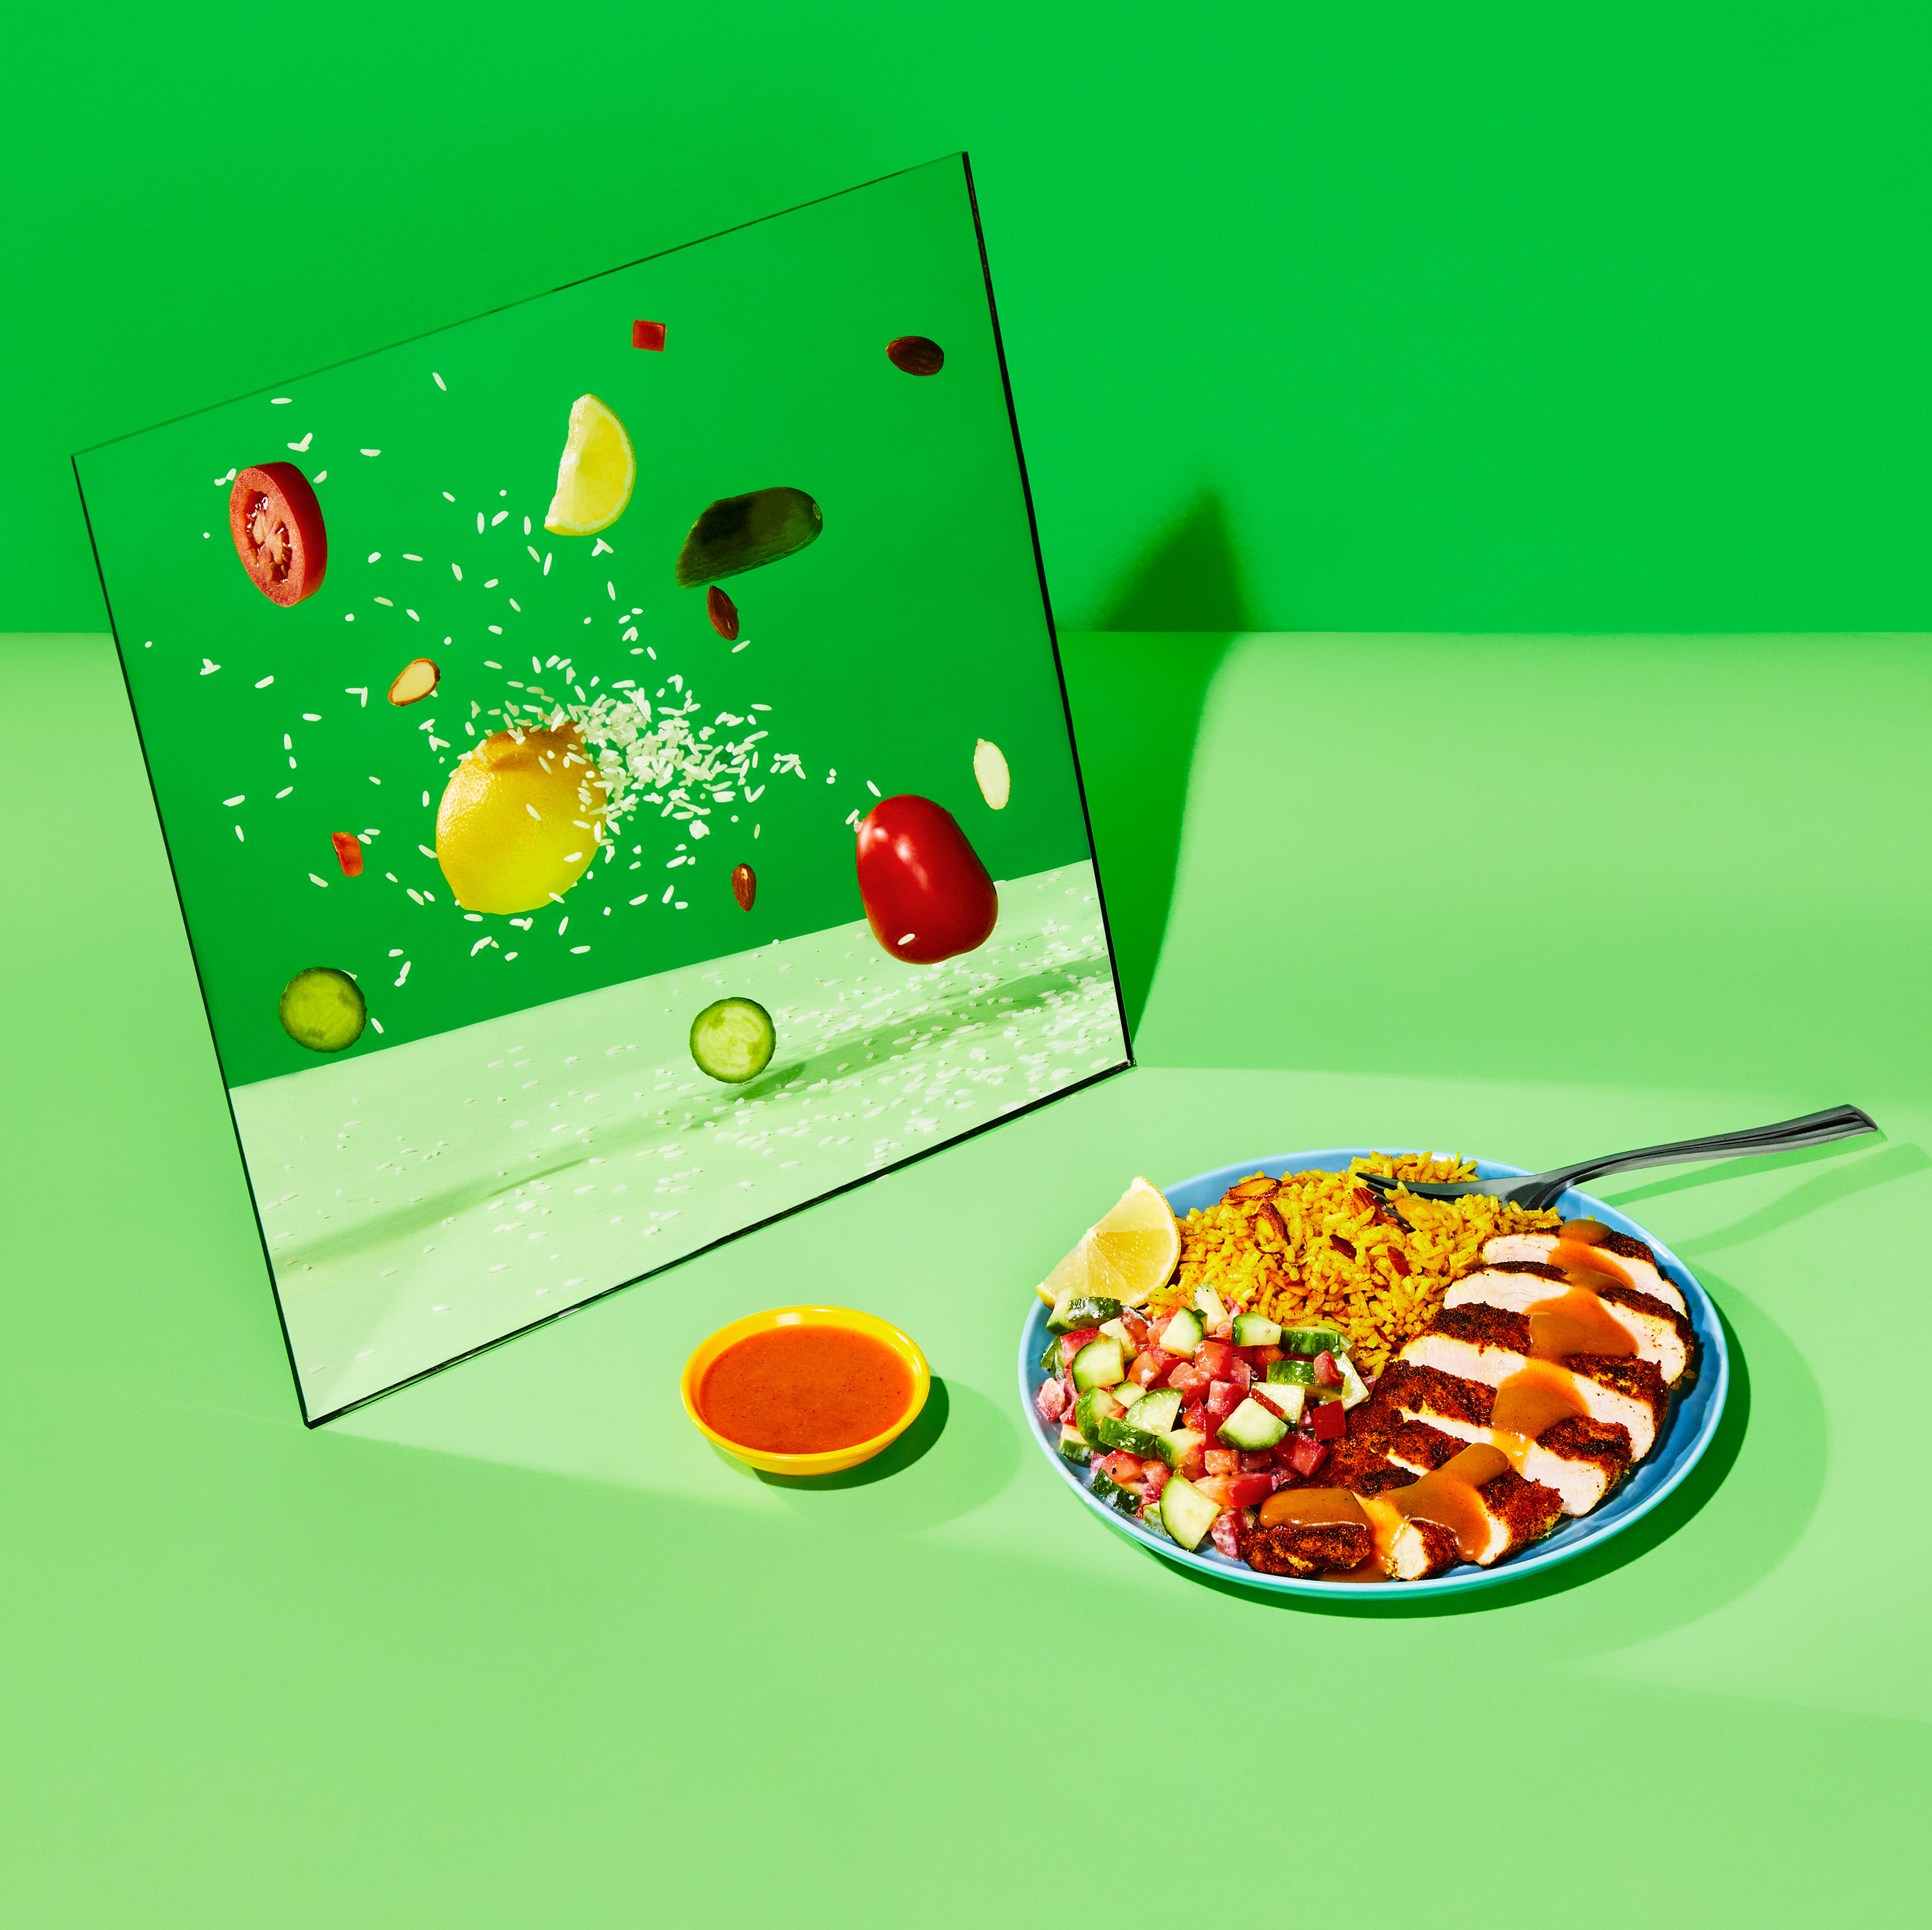 A HelloFresh meal looking into a mirror revealing the ingredients that went into the dish.